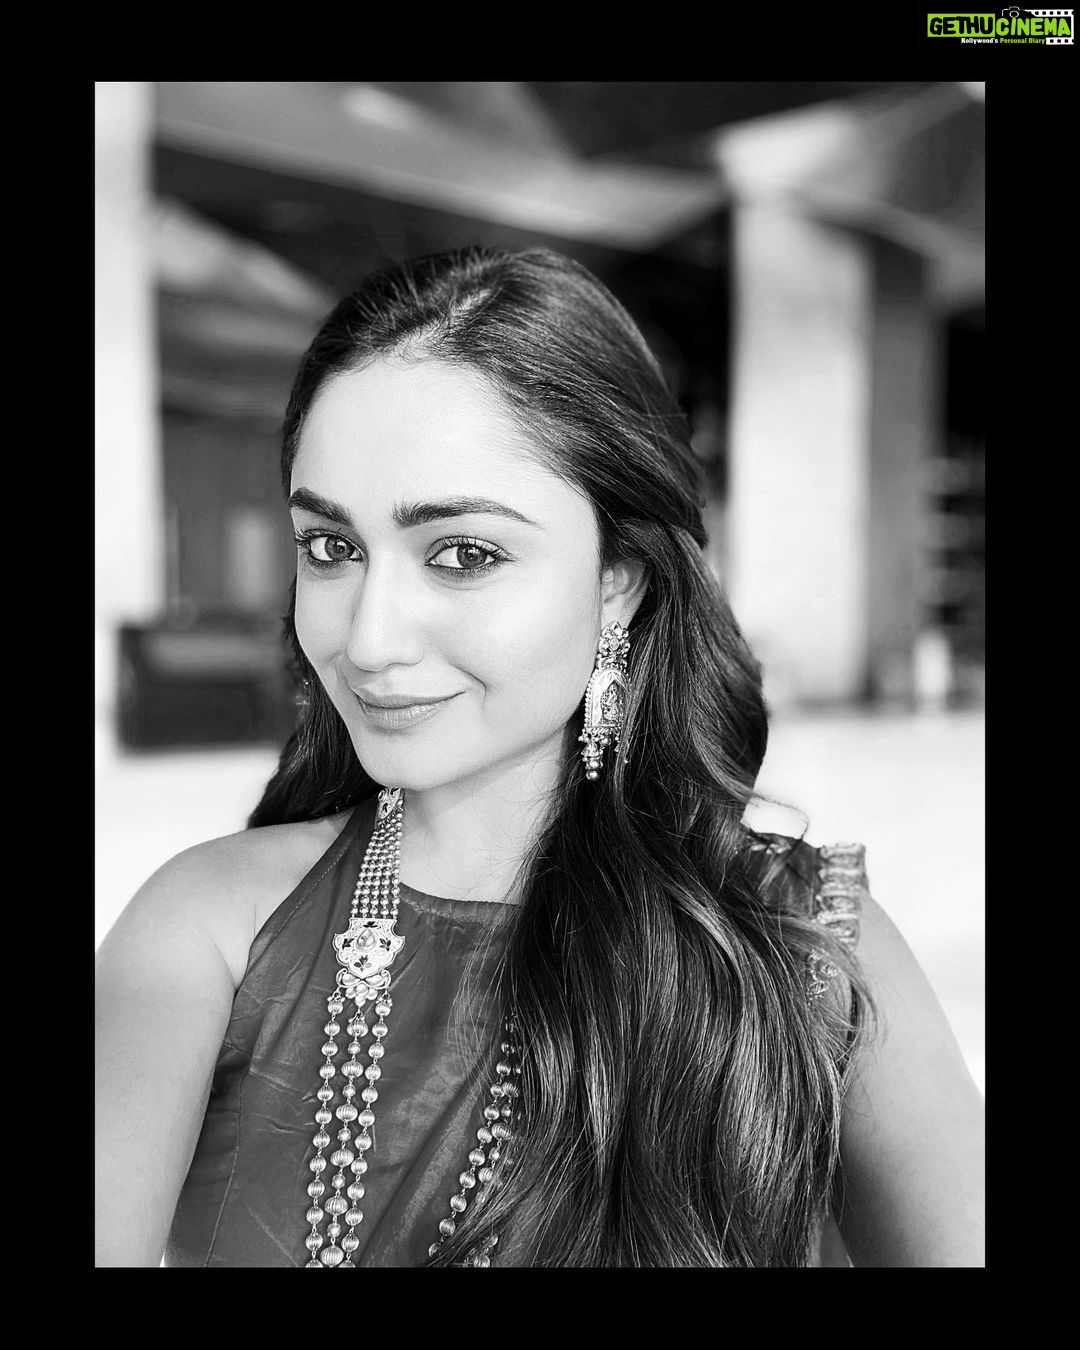 Tridha Choudhury Instagram - The Best thing about festivals is mom sending me her famous Gajar Ka Halwa made with love! Diwali becomes even more happy and loving. It’s famous amongst our relatives, and she makes sure she gets poore season ki carrots for it! 🌺 So I thought, why not gift her something special? My Diwali gift to her was the @panasonic_india refrigerator, and guess what, now I will be eating double the Gajar ka Halwa everyday!! The refrigerator lets her stock up everything with the jumbo storage and the #EconaviSensors ensure optimum cooling is maintained🌺 So, if you’re looking for your Dhanteras gift, then Panasonic is the one to trust! Buy now on Amazon or any leading retail stores nearby🌺 Wardrobe @wearsasya 🌺 #IntelligentHai #panasonicrefrigerators #diwali #diwali2020 #diwaligifts #diwalidecorations